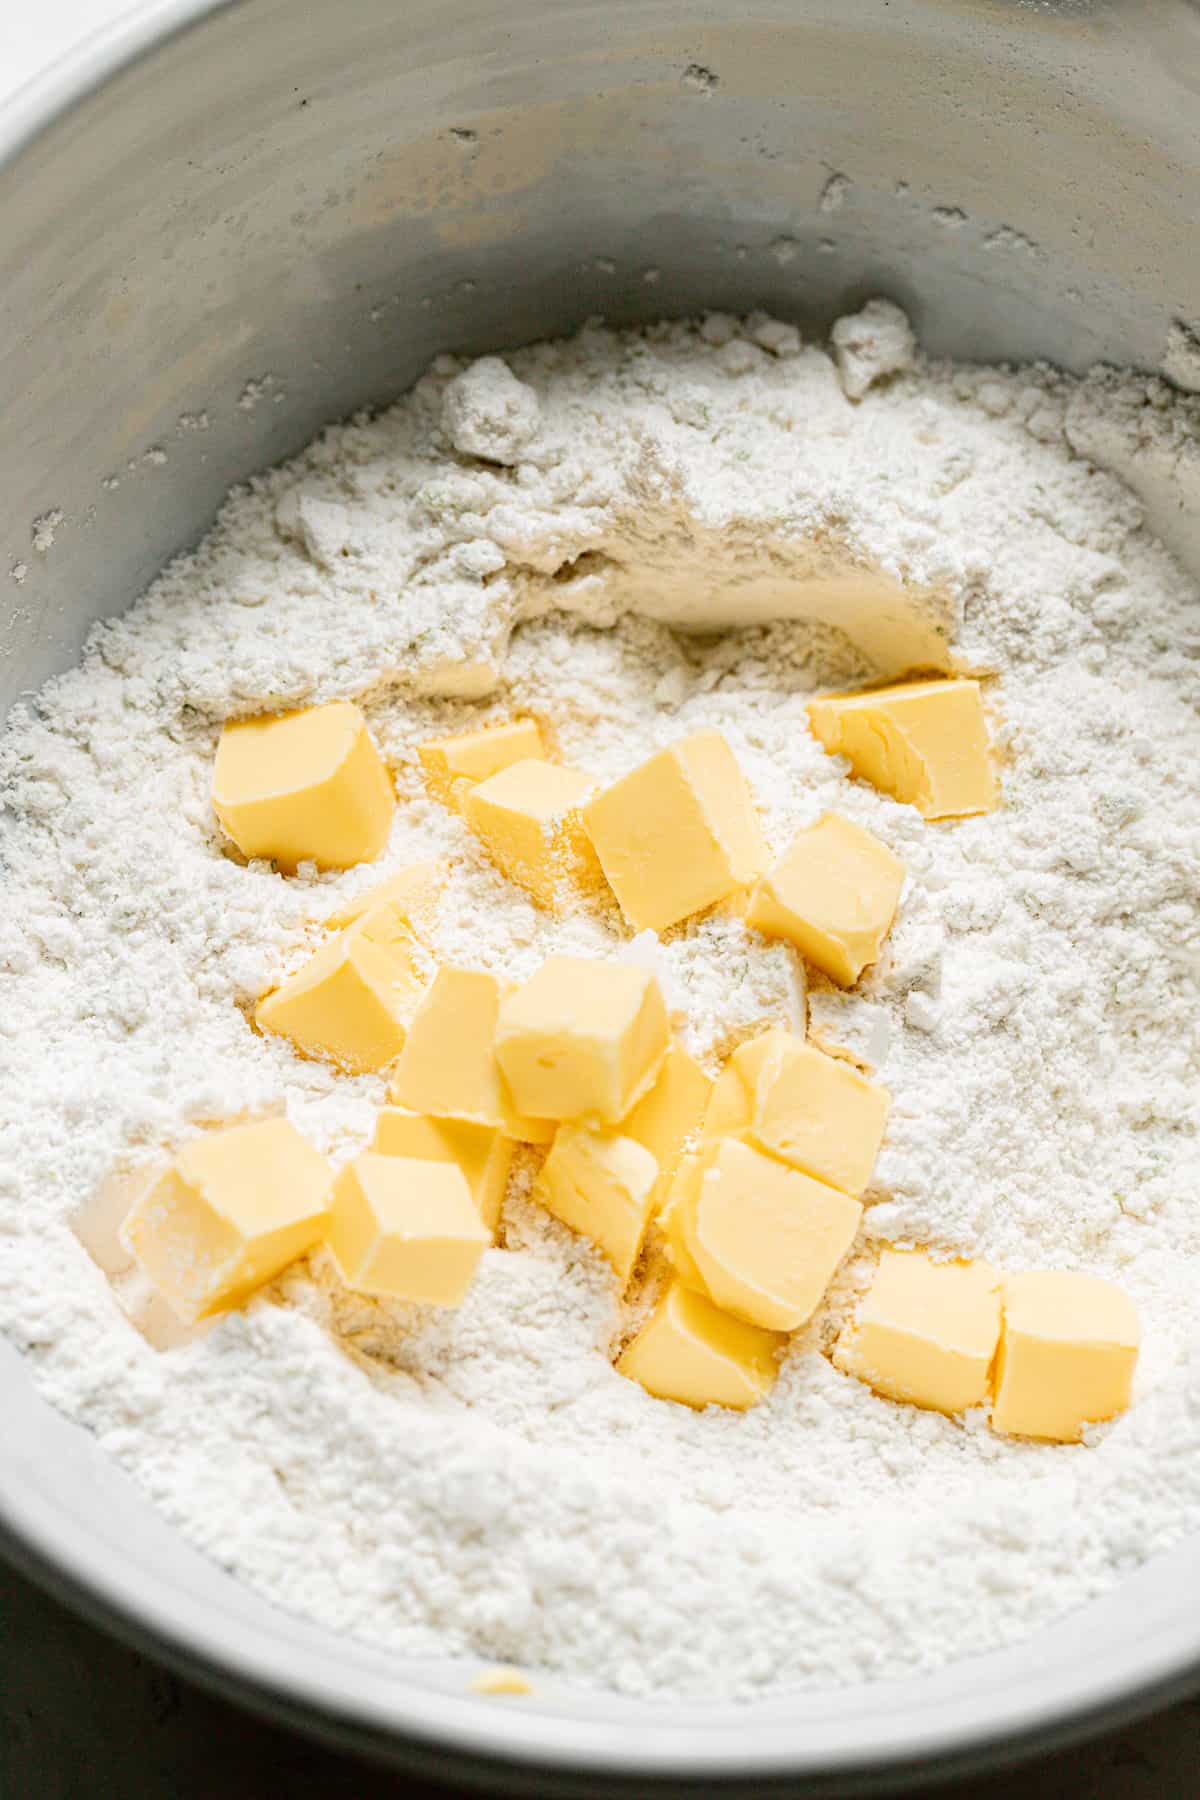 butter mixed into dry ingredients in bowl.